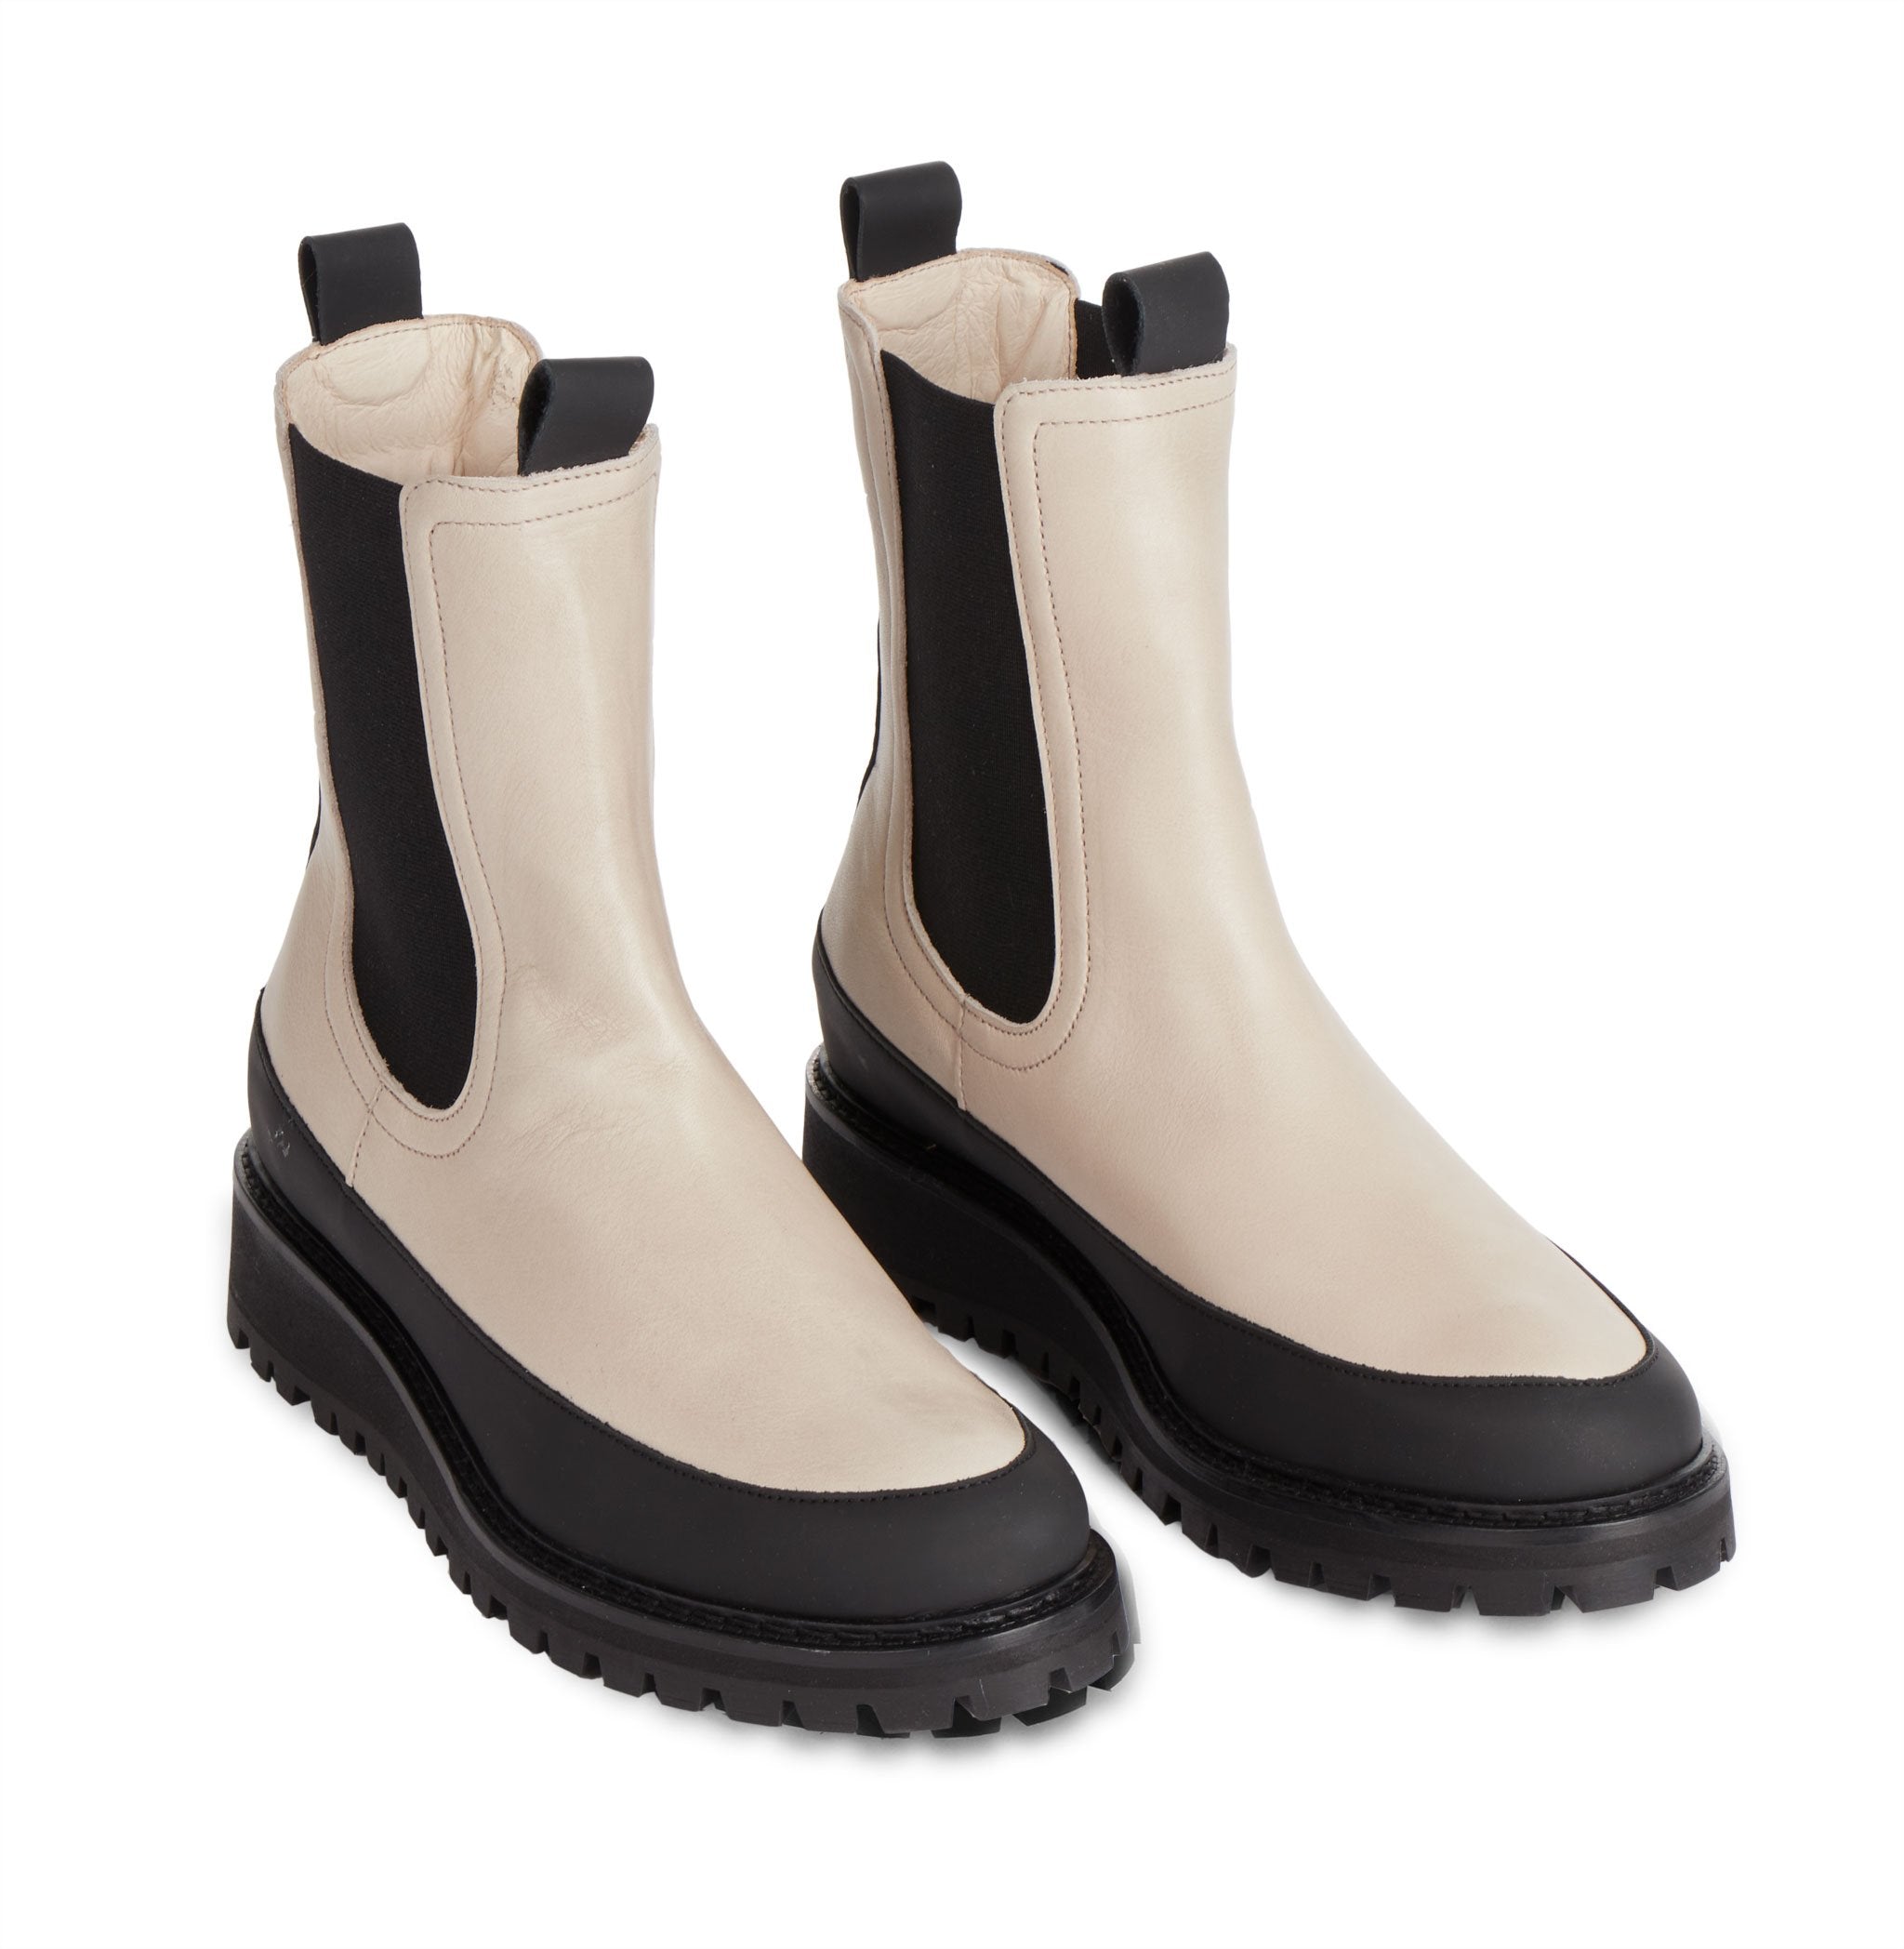 Lowa Off White Chelsea Boots 03-016-011-Off White - 04